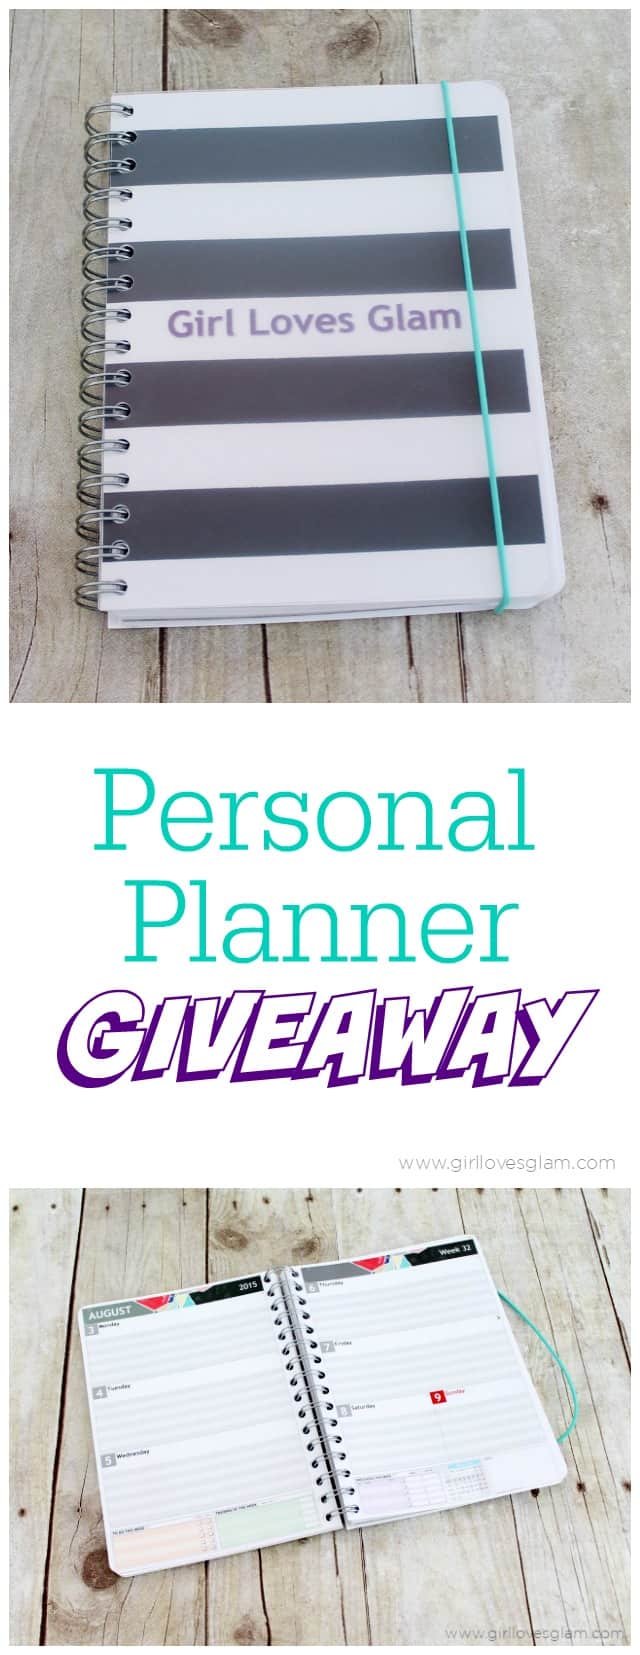 Amazing Personal Planner Giveaway on www.girllovesglam.com